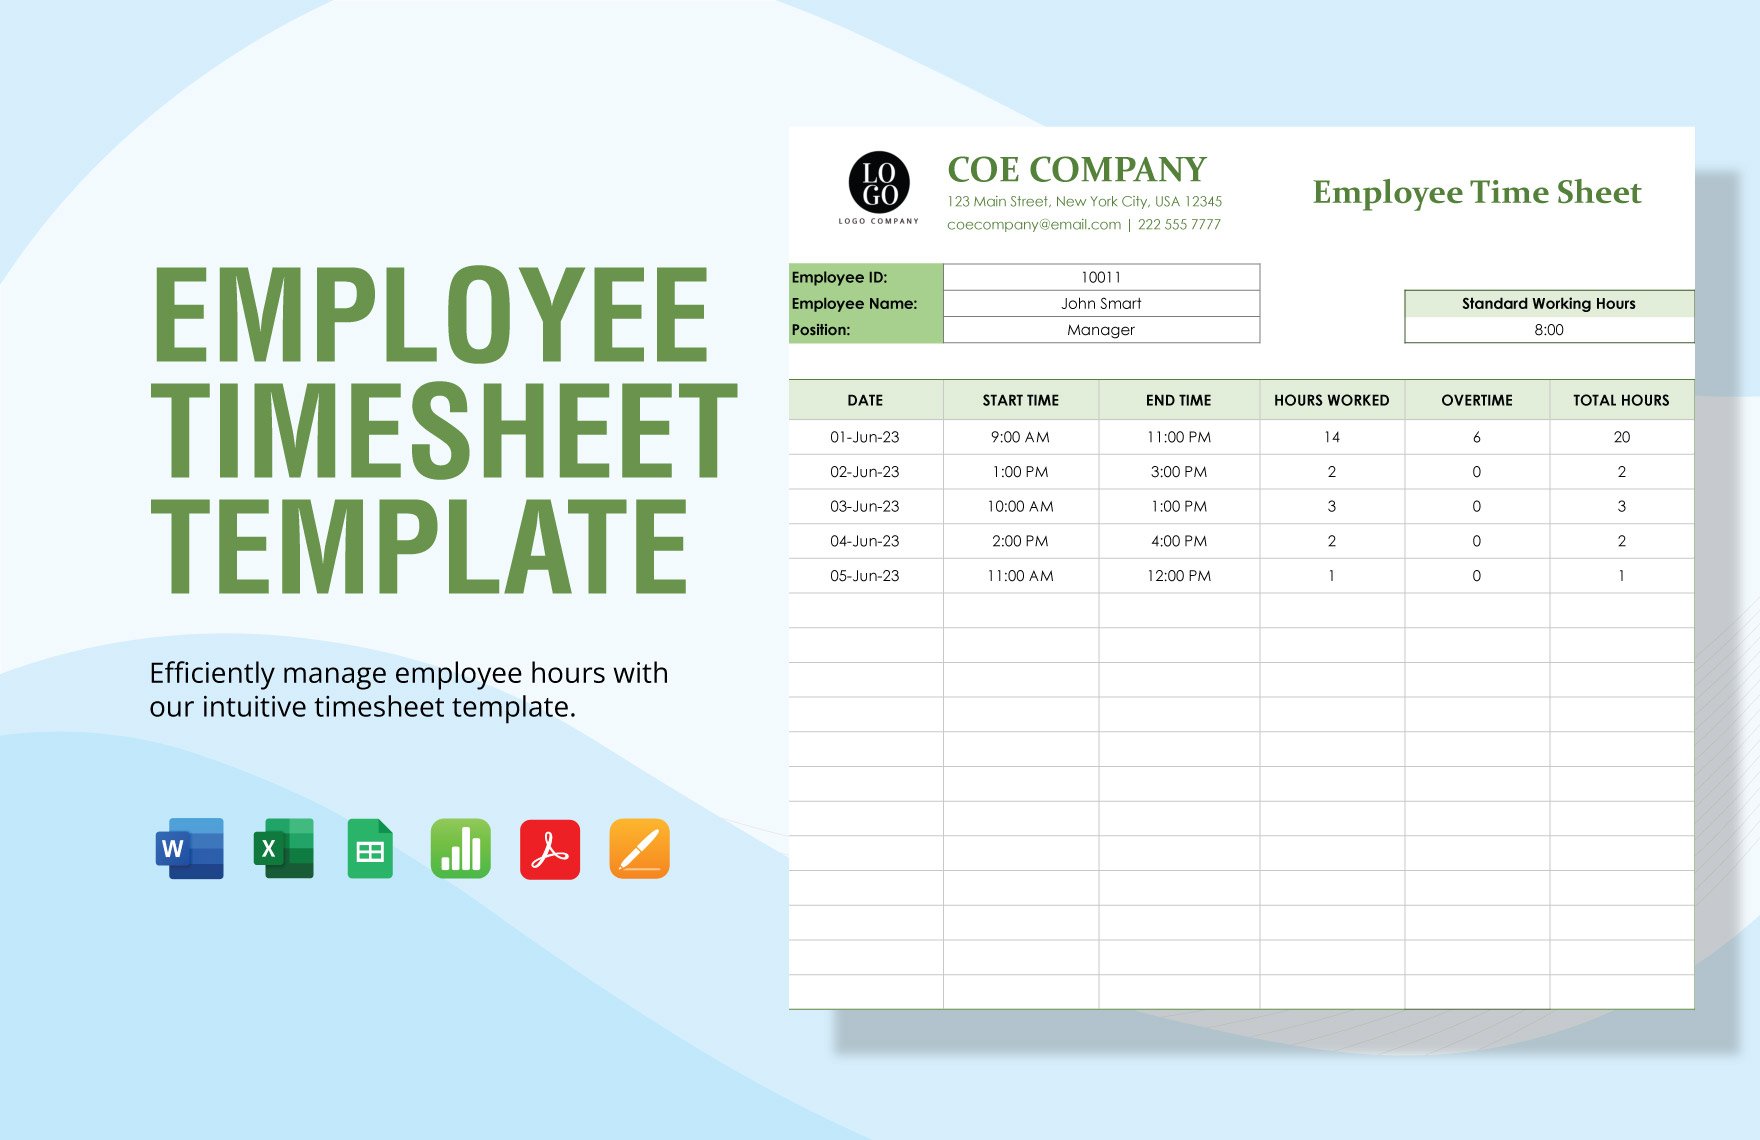 Employee  Timesheet  Template in Word, Excel, PDF, Google Sheets, Apple Pages, Apple Numbers